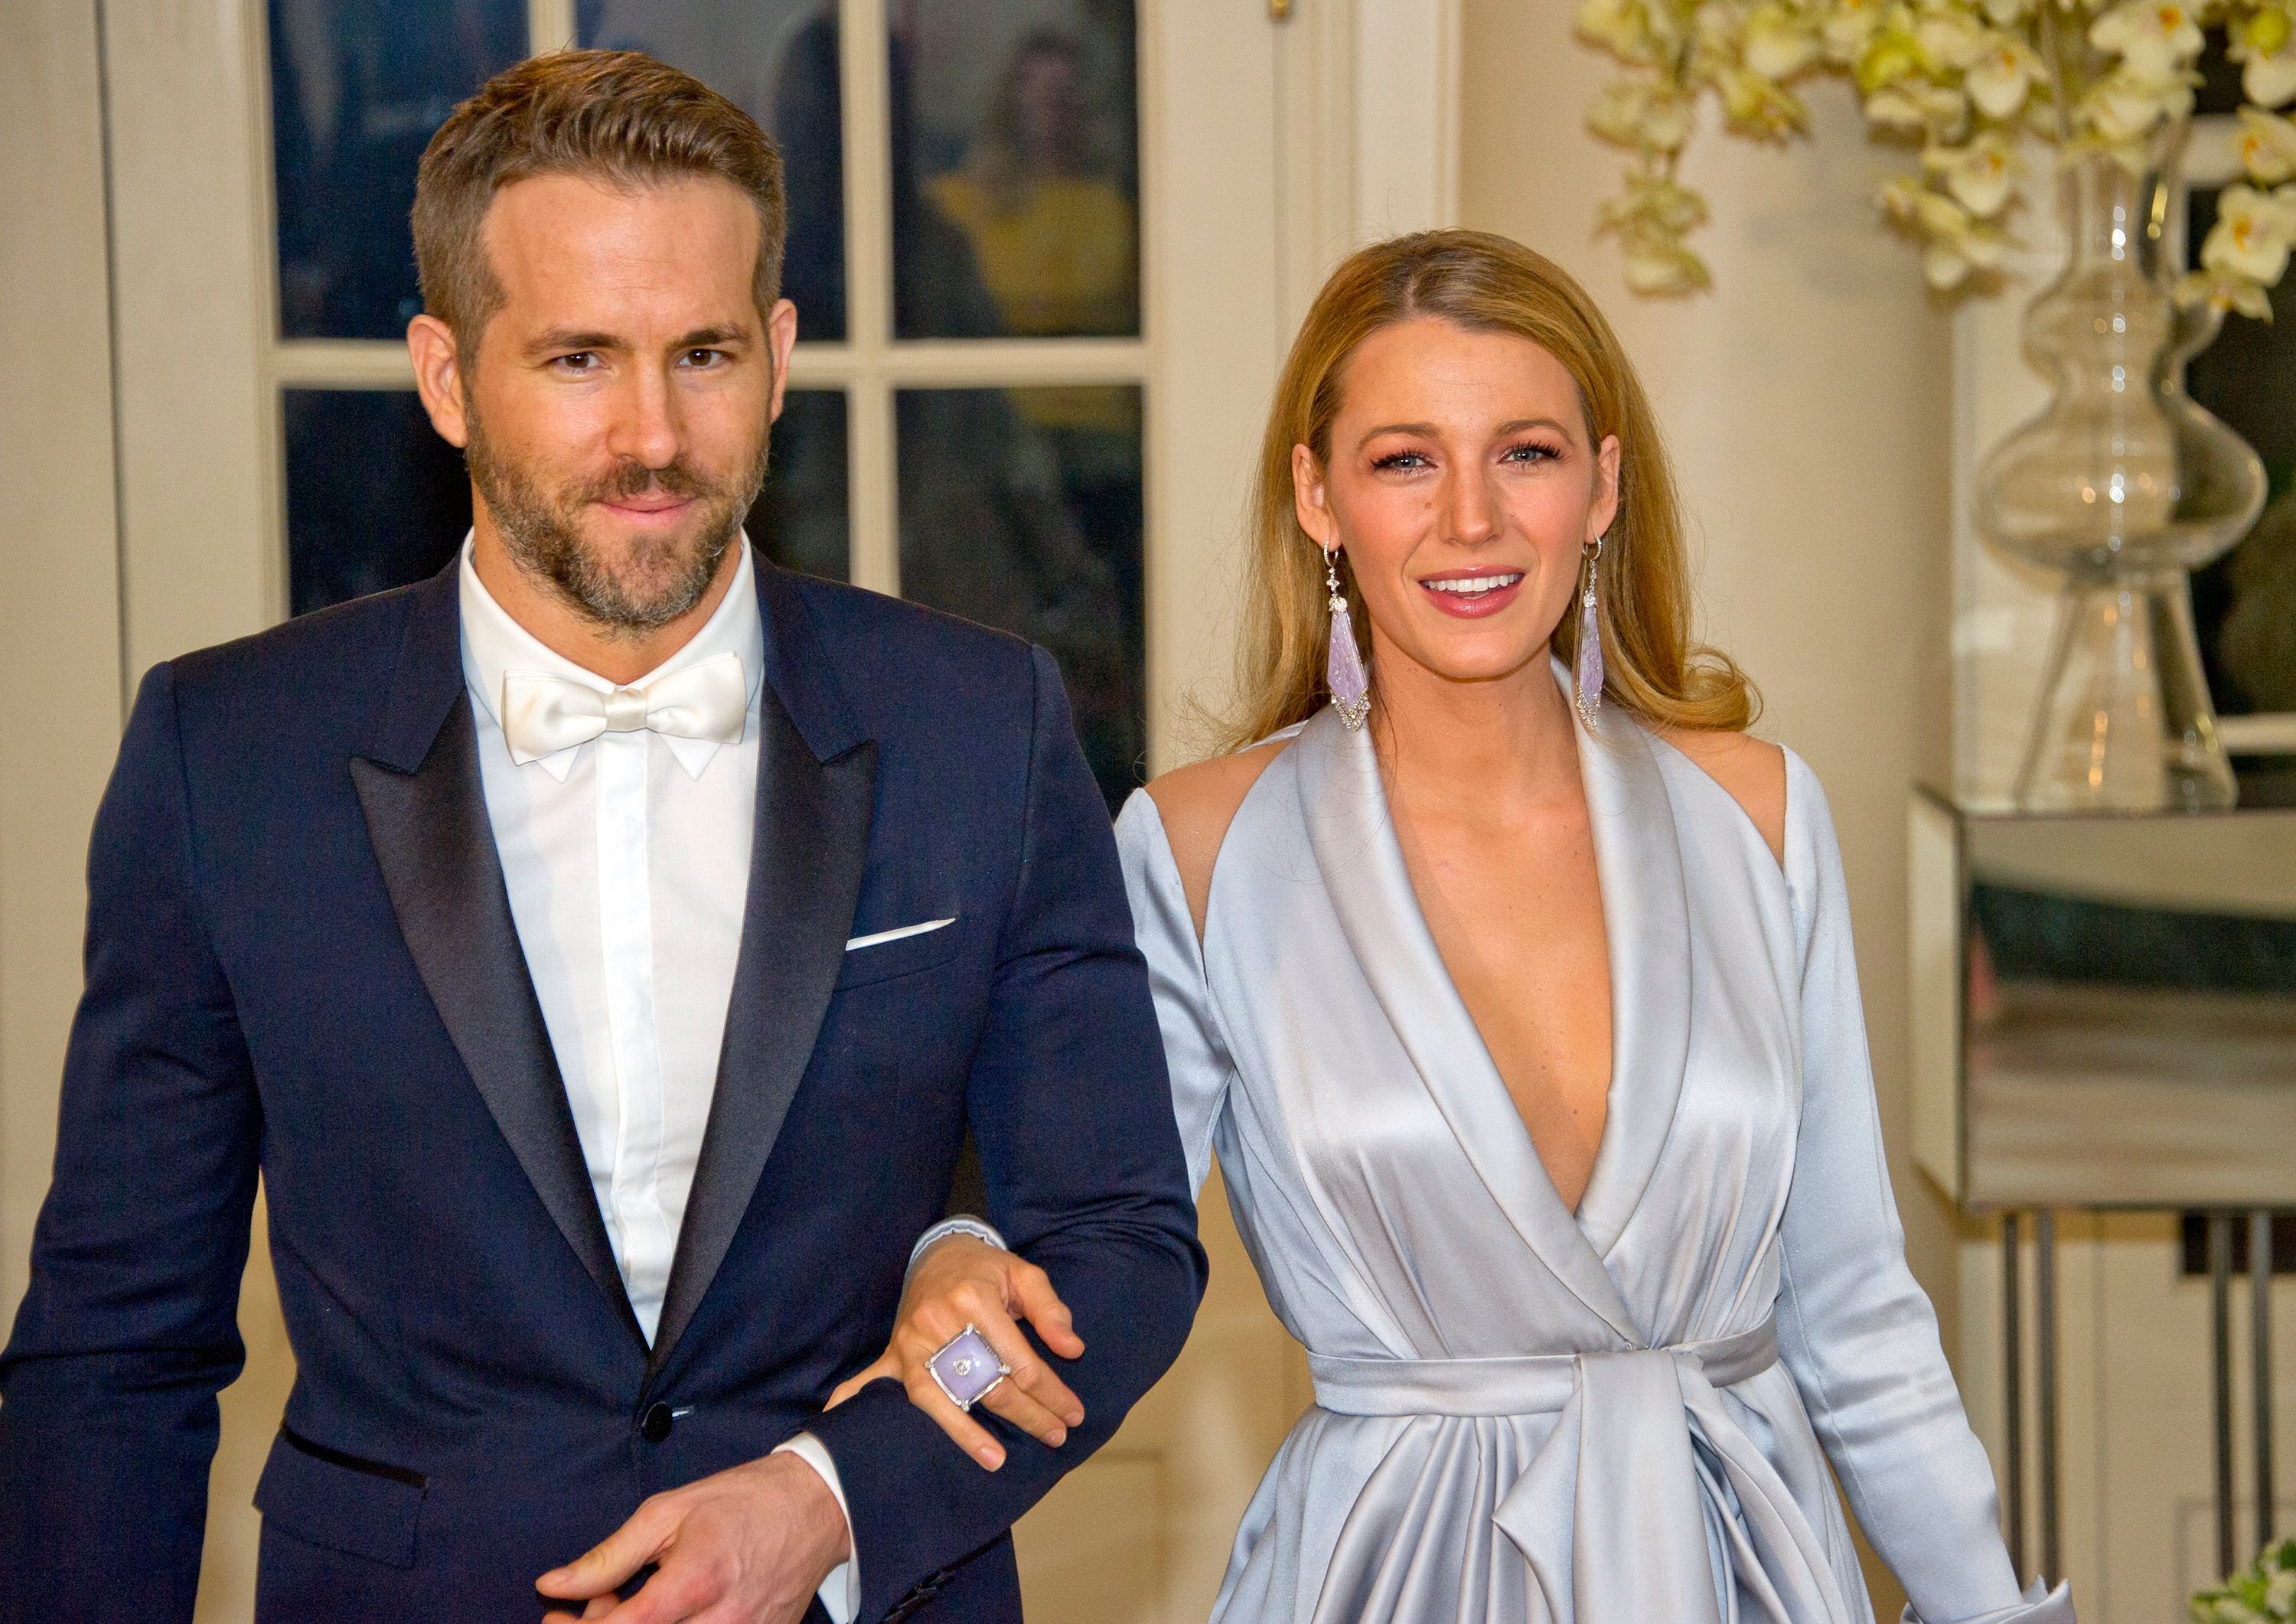 Ryan Reynolds and Blake Lively at a State Dinner in honor of Canadian Prime Minister Trudeau at the White House on March 10, 2016 | Source: Getty Images